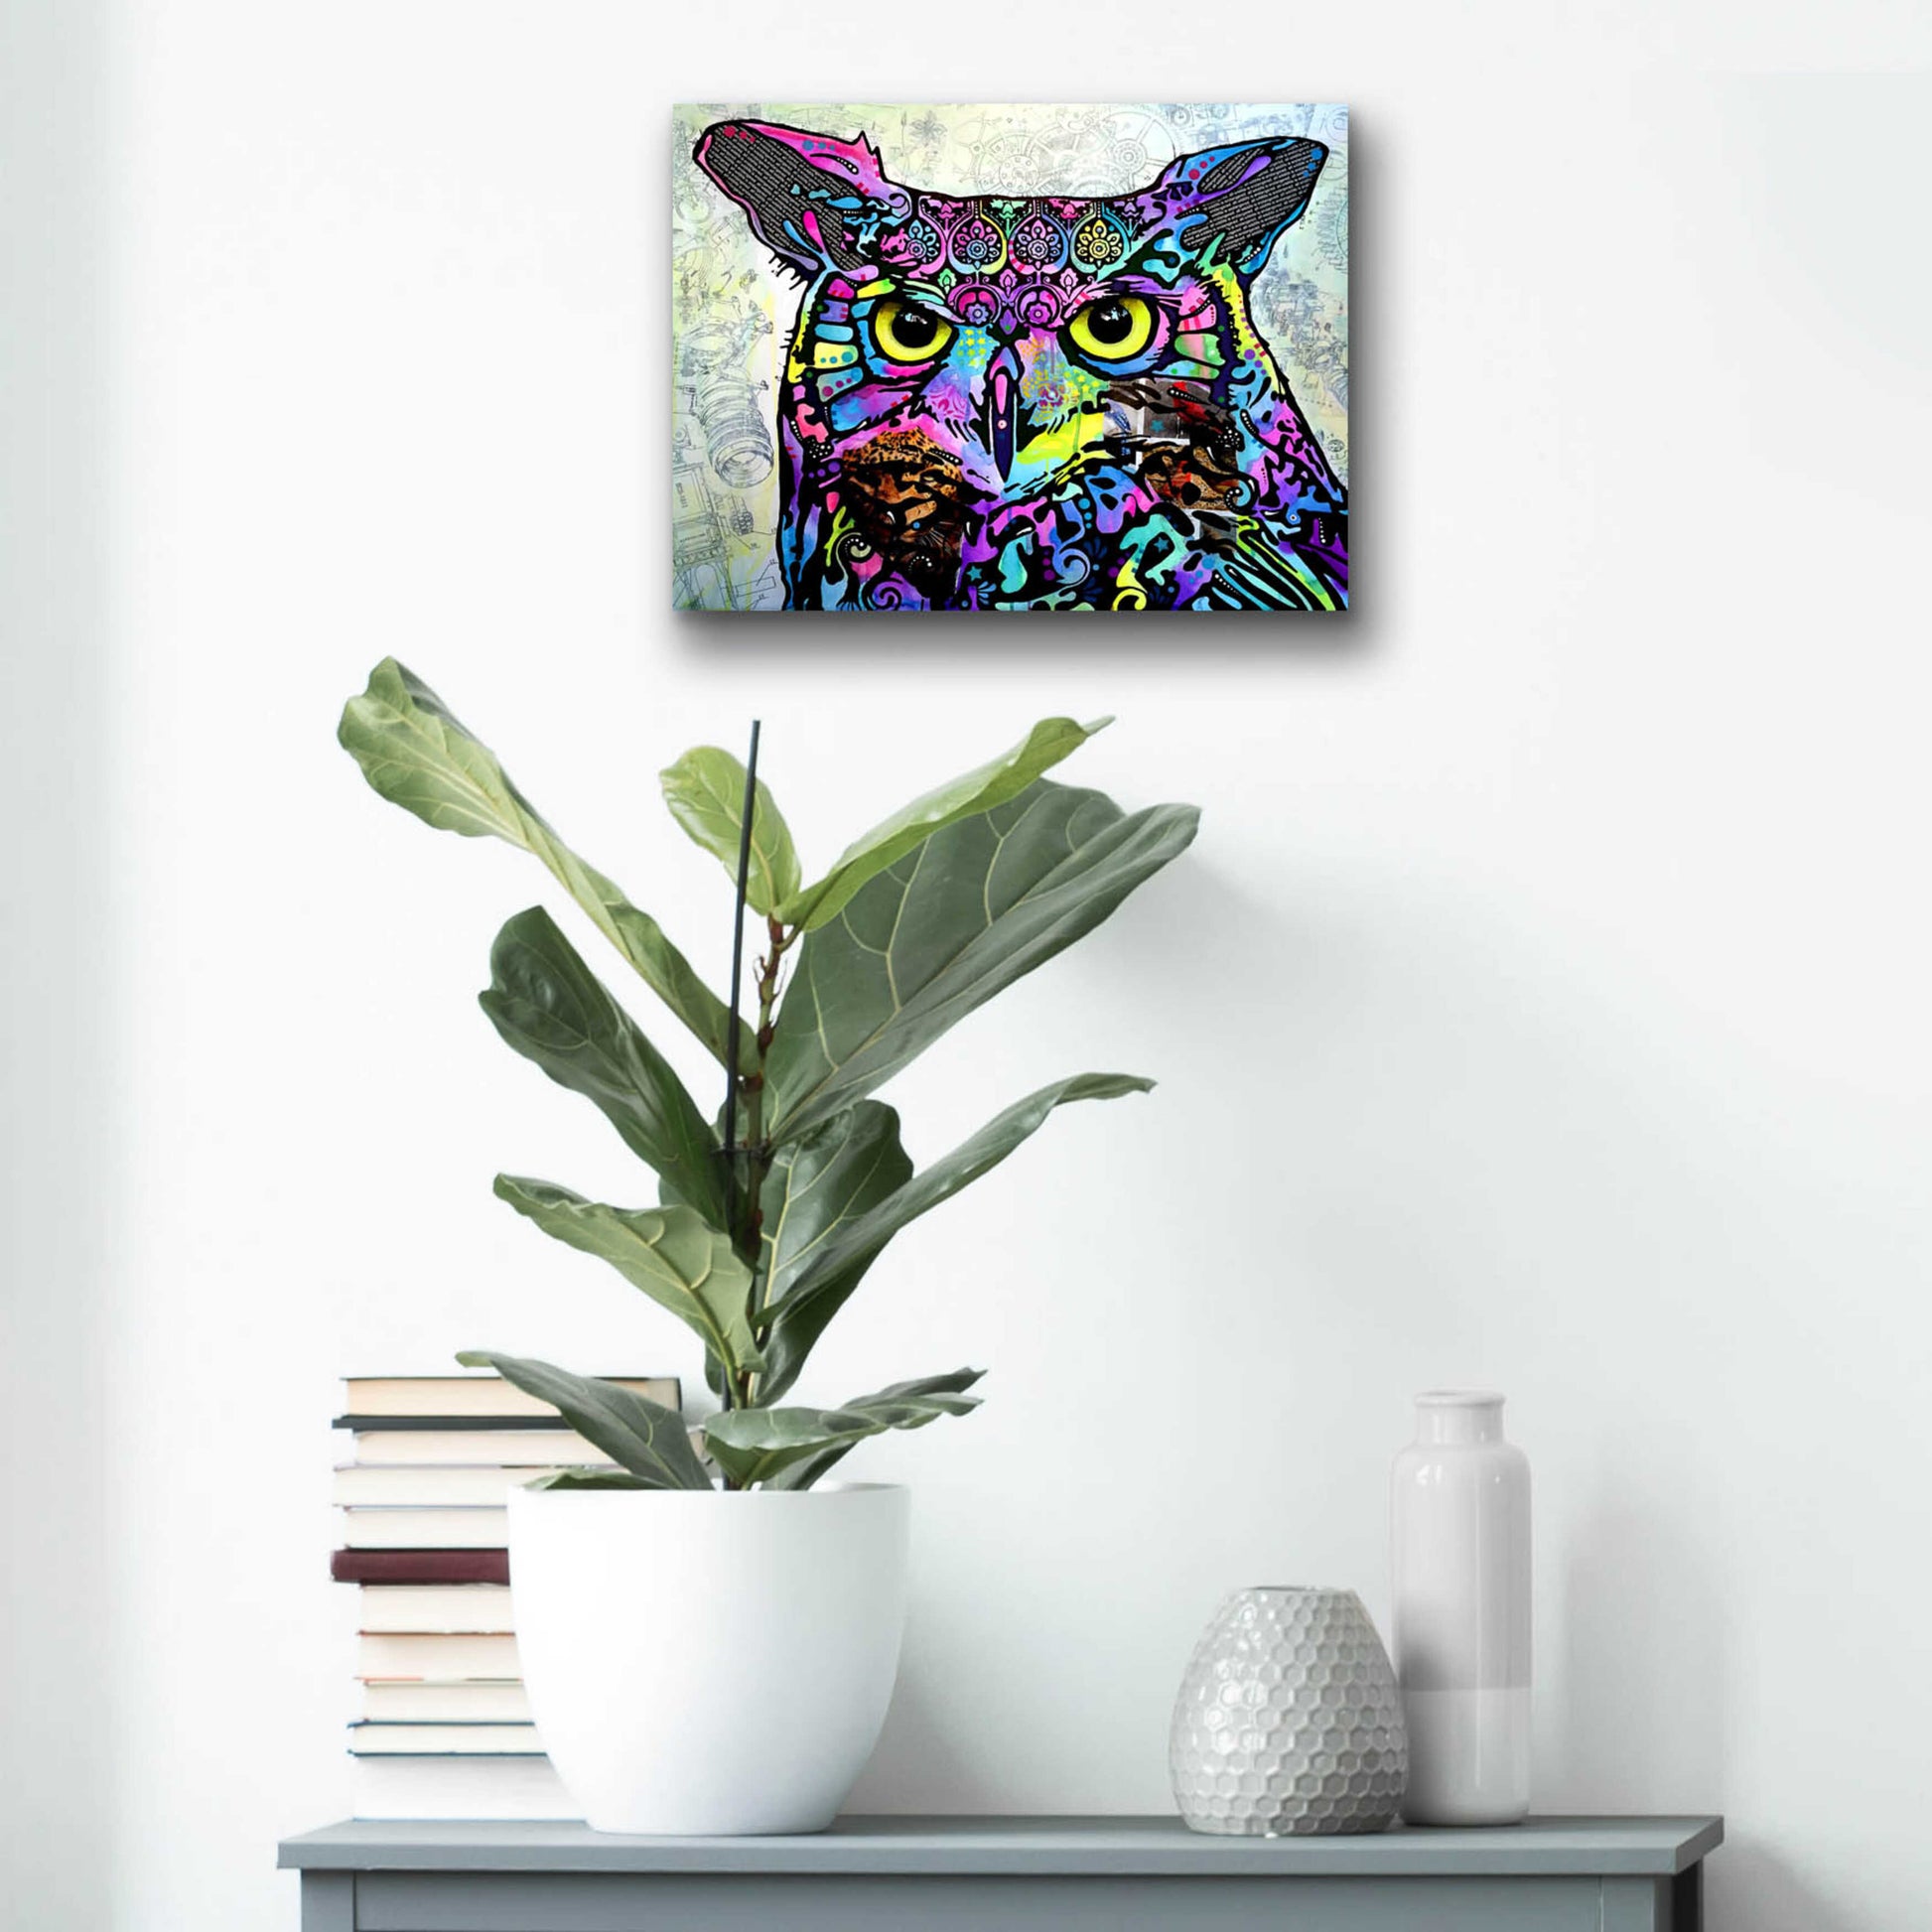 Epic Art 'The Owl' by Dean Russo, Acrylic Glass Wall Art,16x12